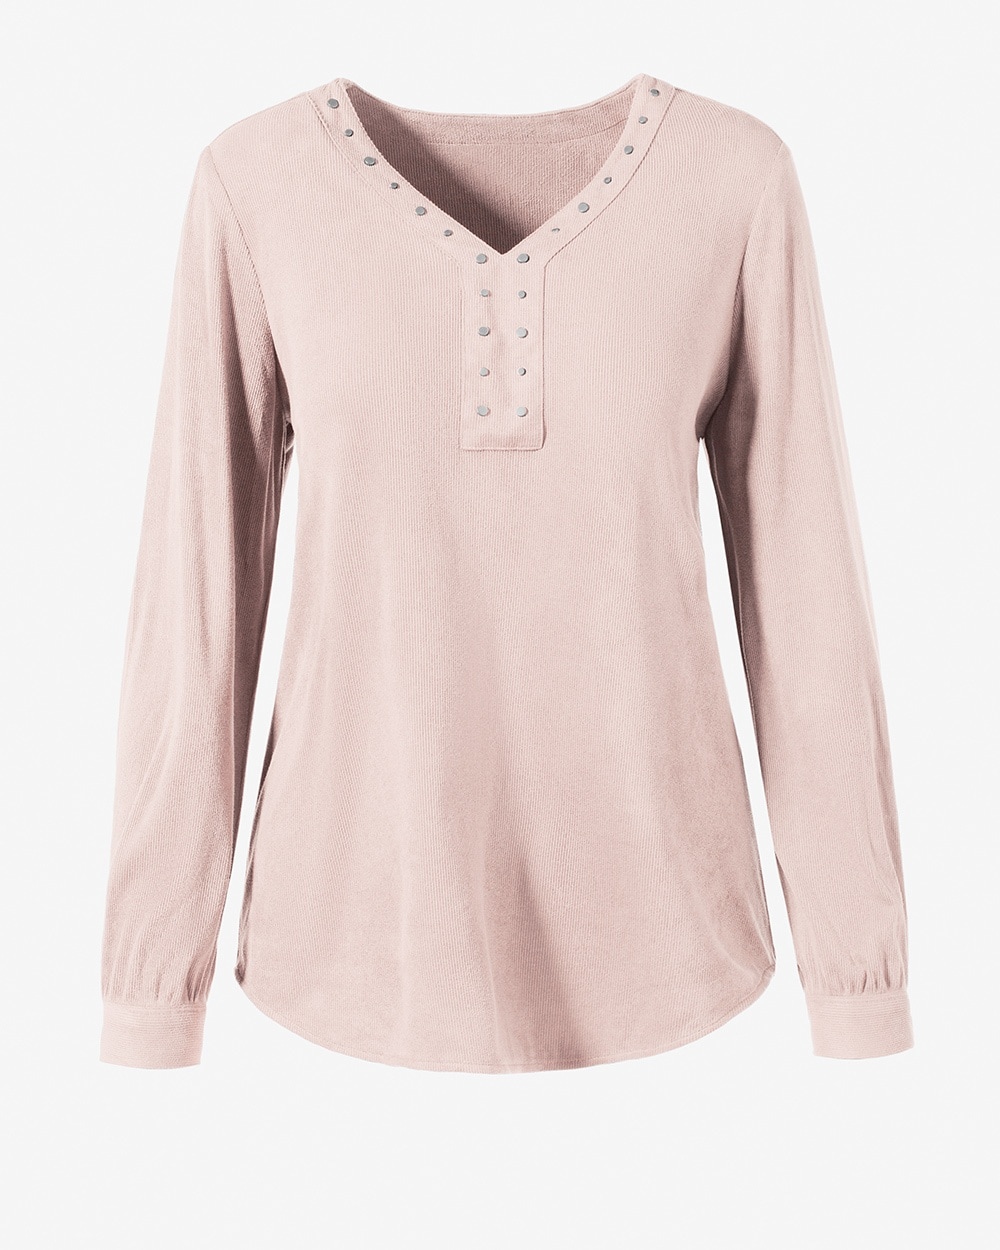 Embellished Corded Faux-Suede Top